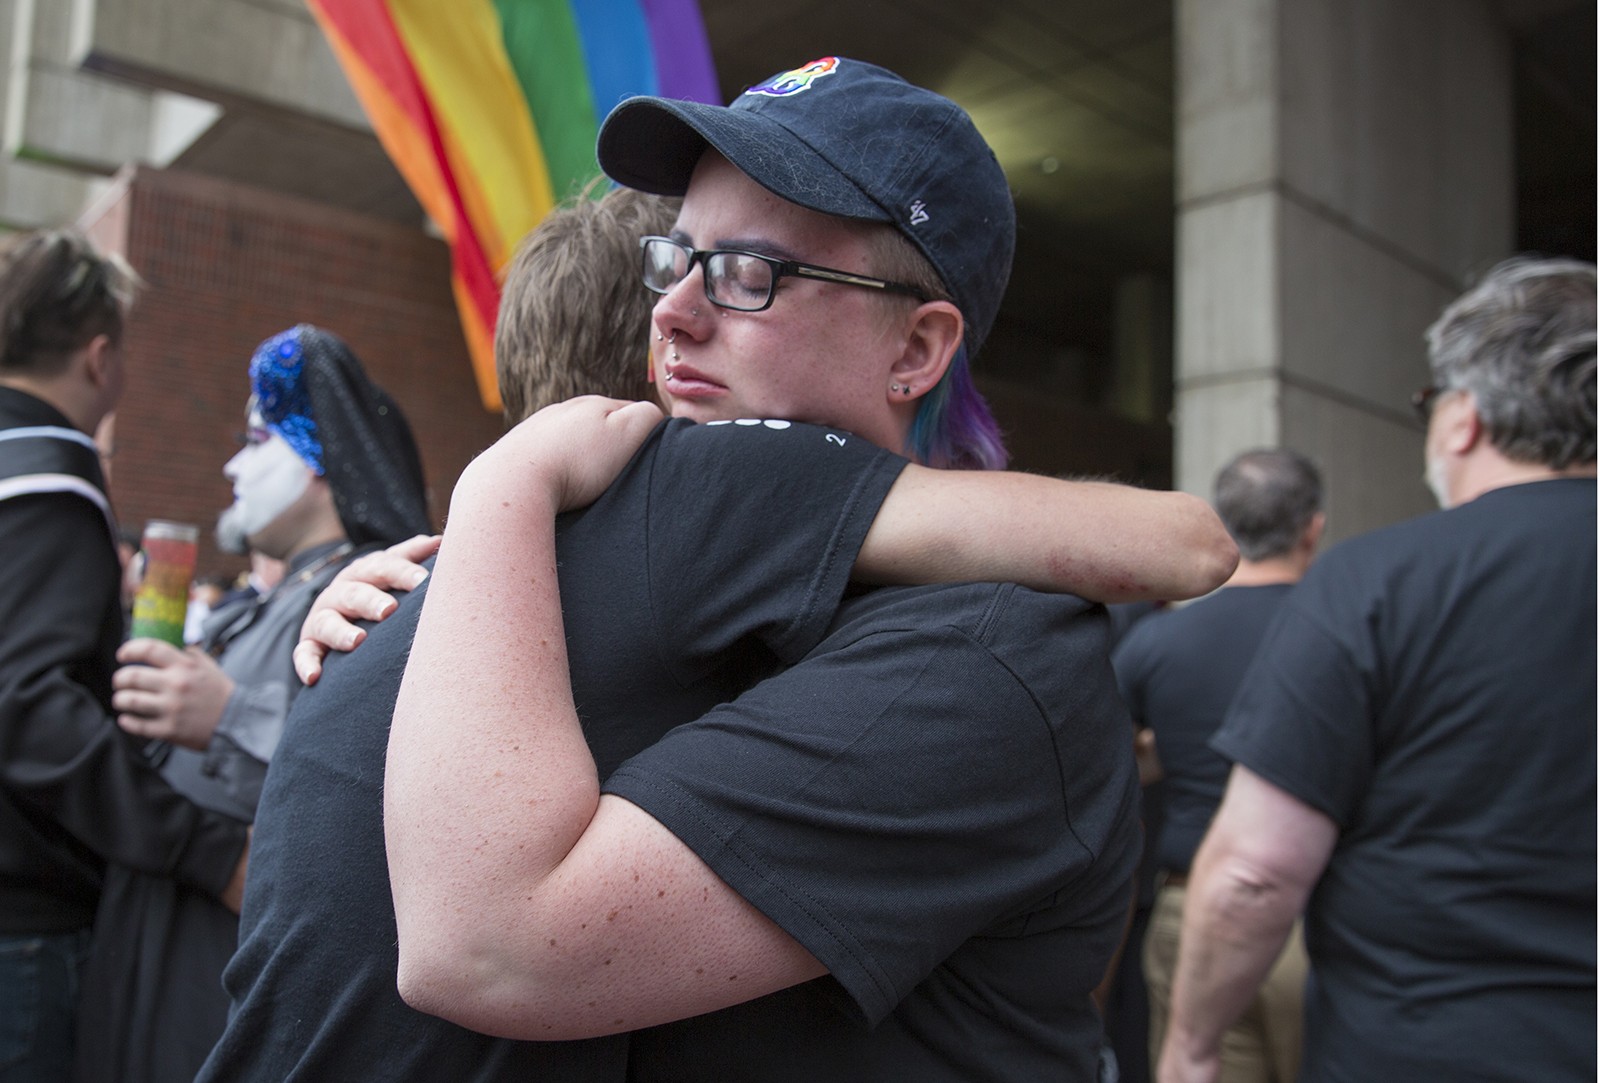 Amidst hundreds of other supporters, members of a Boston Pride group hug at City Hall Monday evening. PHOTO BY SARAH SILBIGER/ DAILY FREE PRESS STAFF